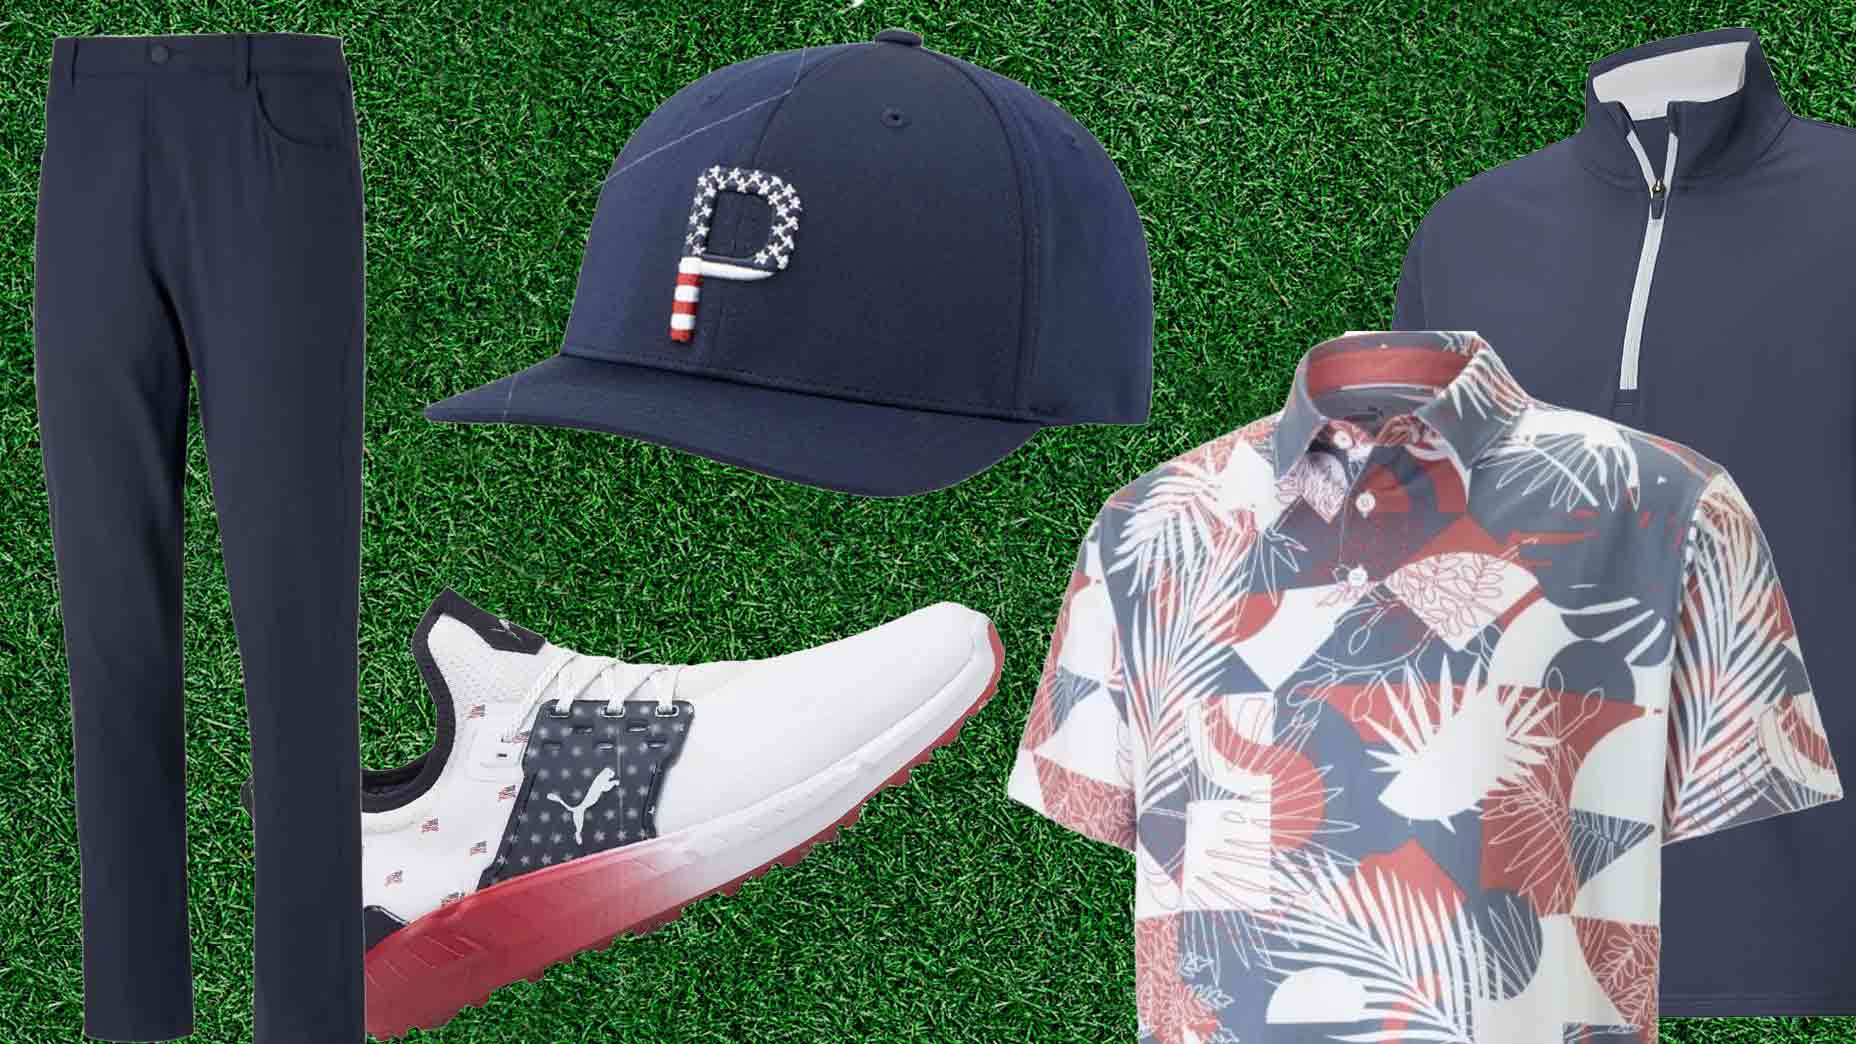 Shop Rickie Fowler's patriotic red, white and blue Round 2 U.S. Open